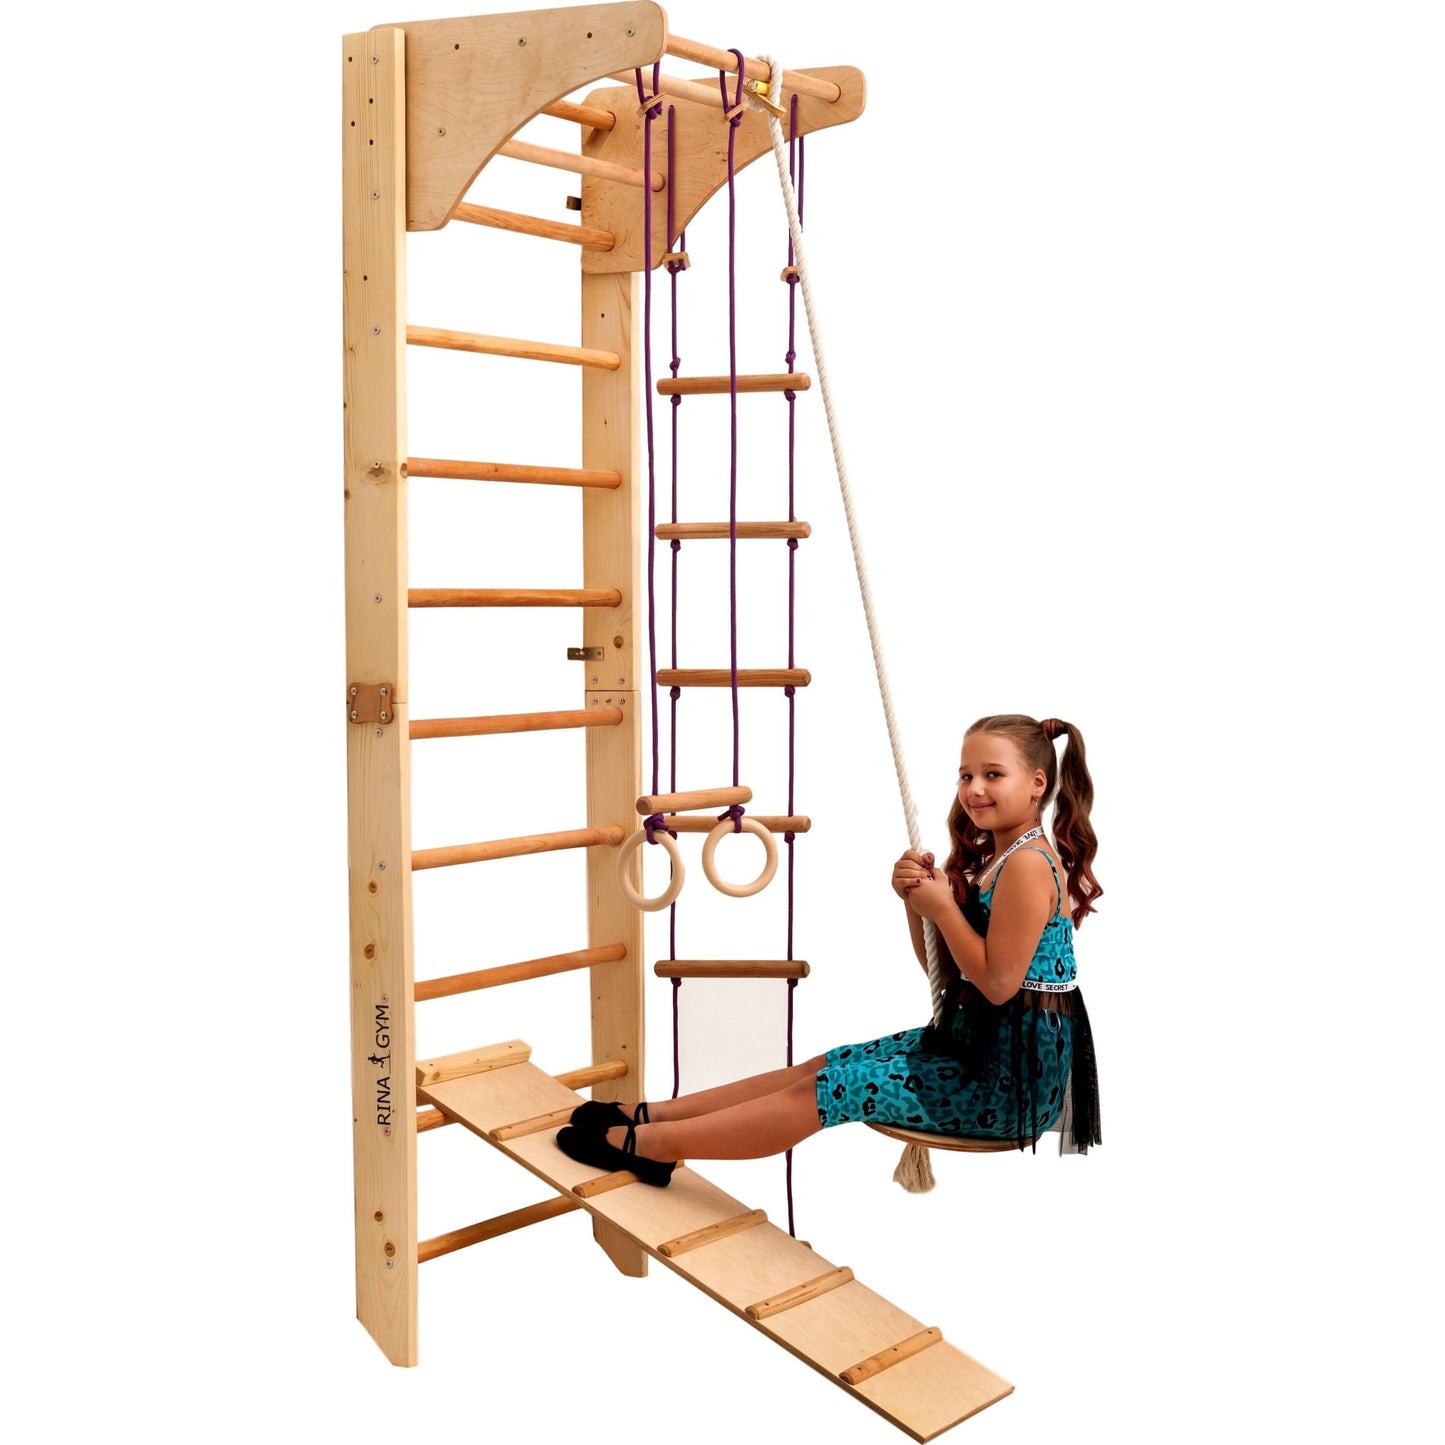 Climbing wall HANNAH for children, different colors